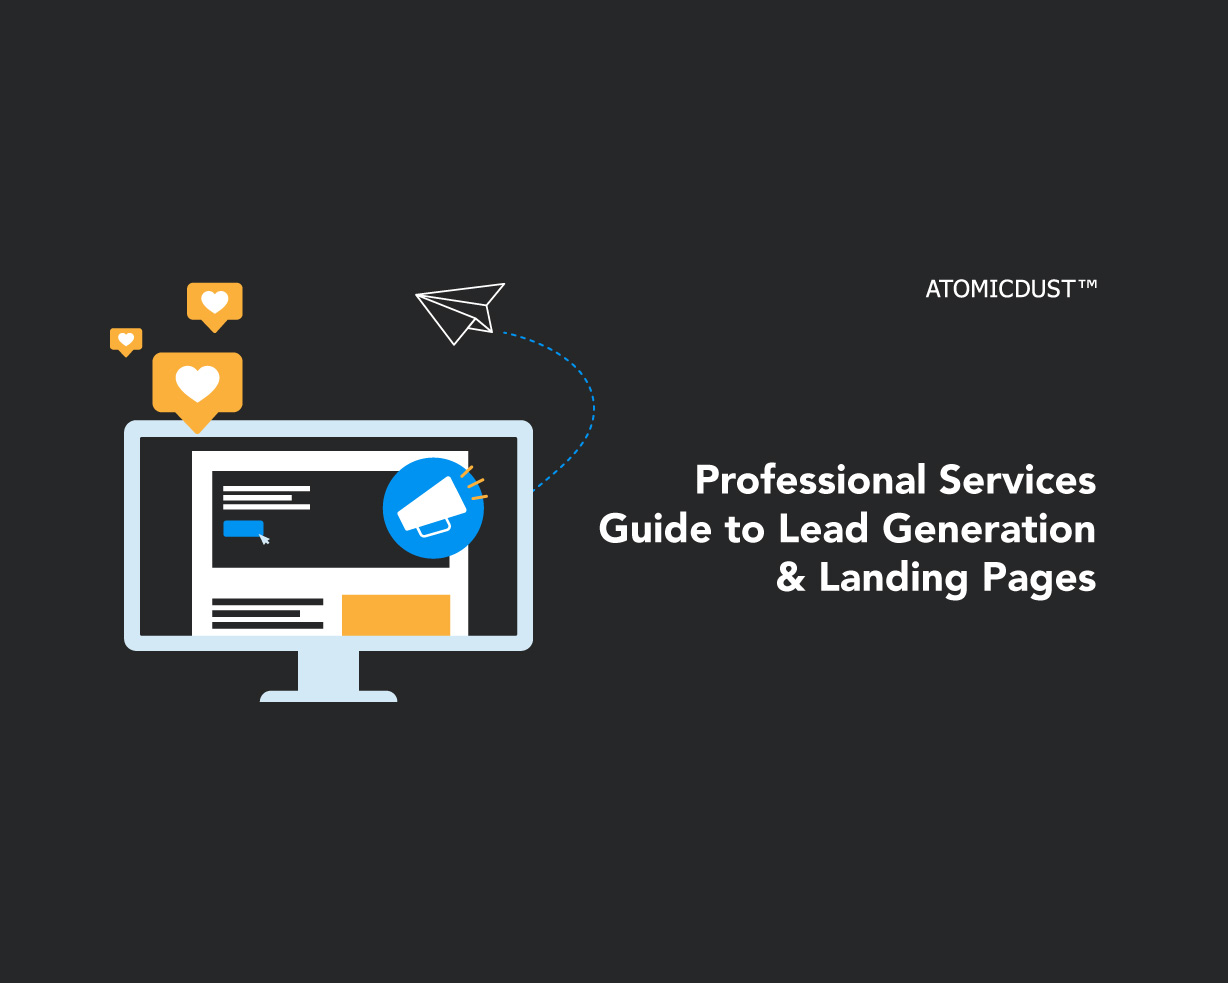 Professional Services Guide to Lead Generation & Landing Pages